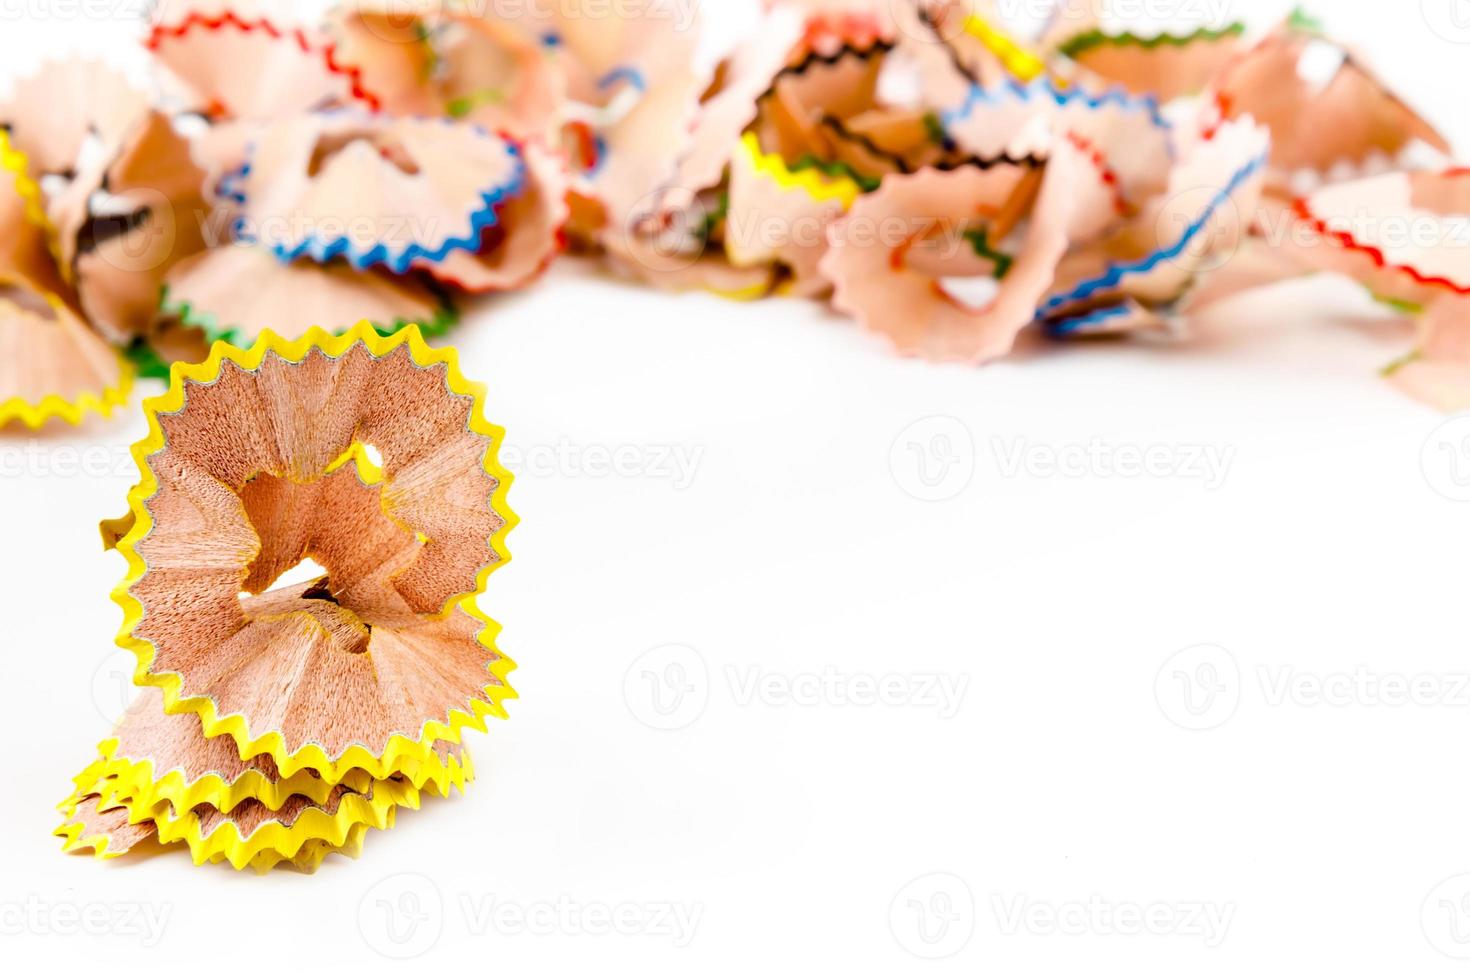 Yellow pencil shavings with more shavings at the background. Horizontal image. photo